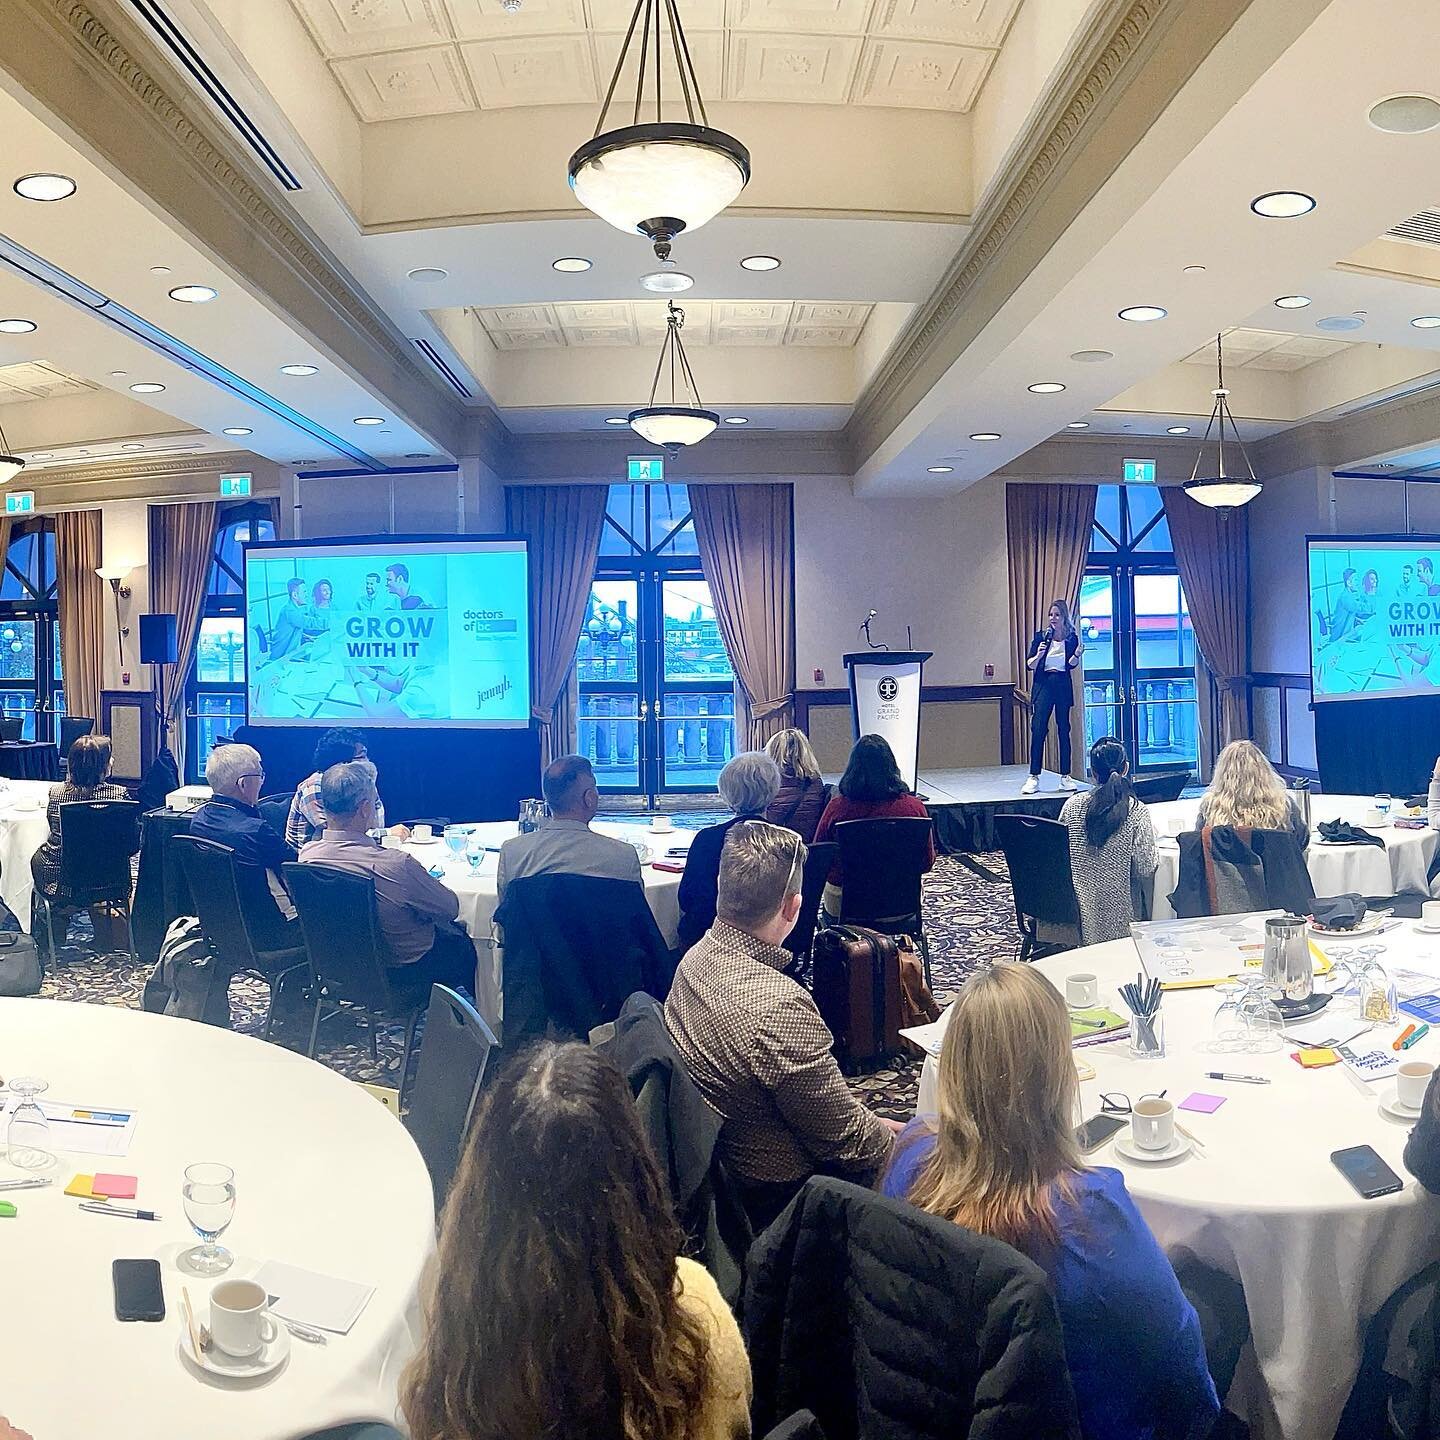 I was very excited to be the opening keynote for the Doctors of British Columbia this morning. 
.
We talked about growth and resilience in difficult times.  We discussed why it is so important to focus on where we want to go and the tools, strengths 